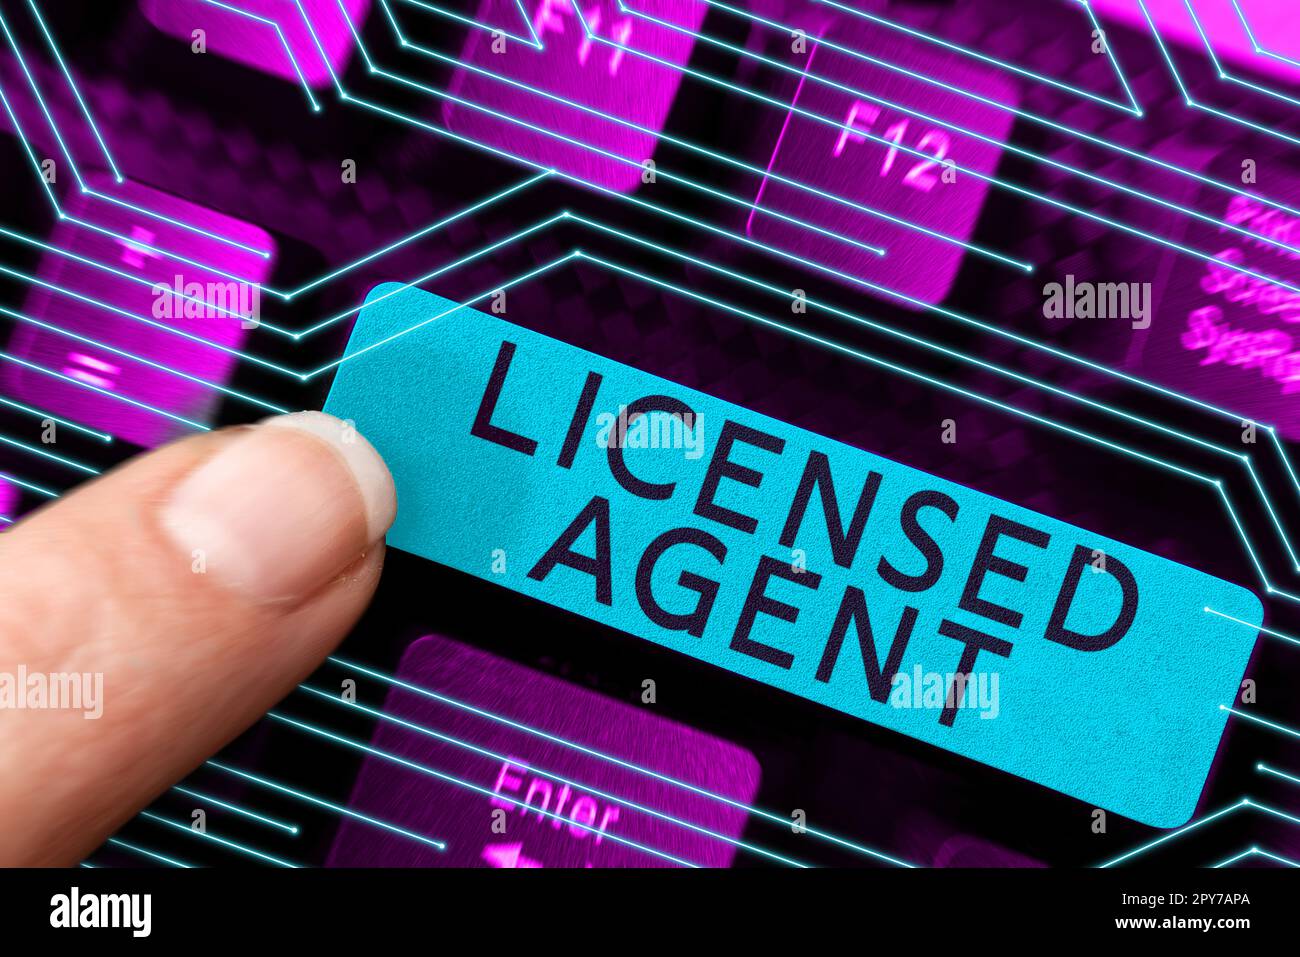 Writing displaying text Licensed Agent. Word for Authorized and Accredited seller of insurance policies Stock Photo